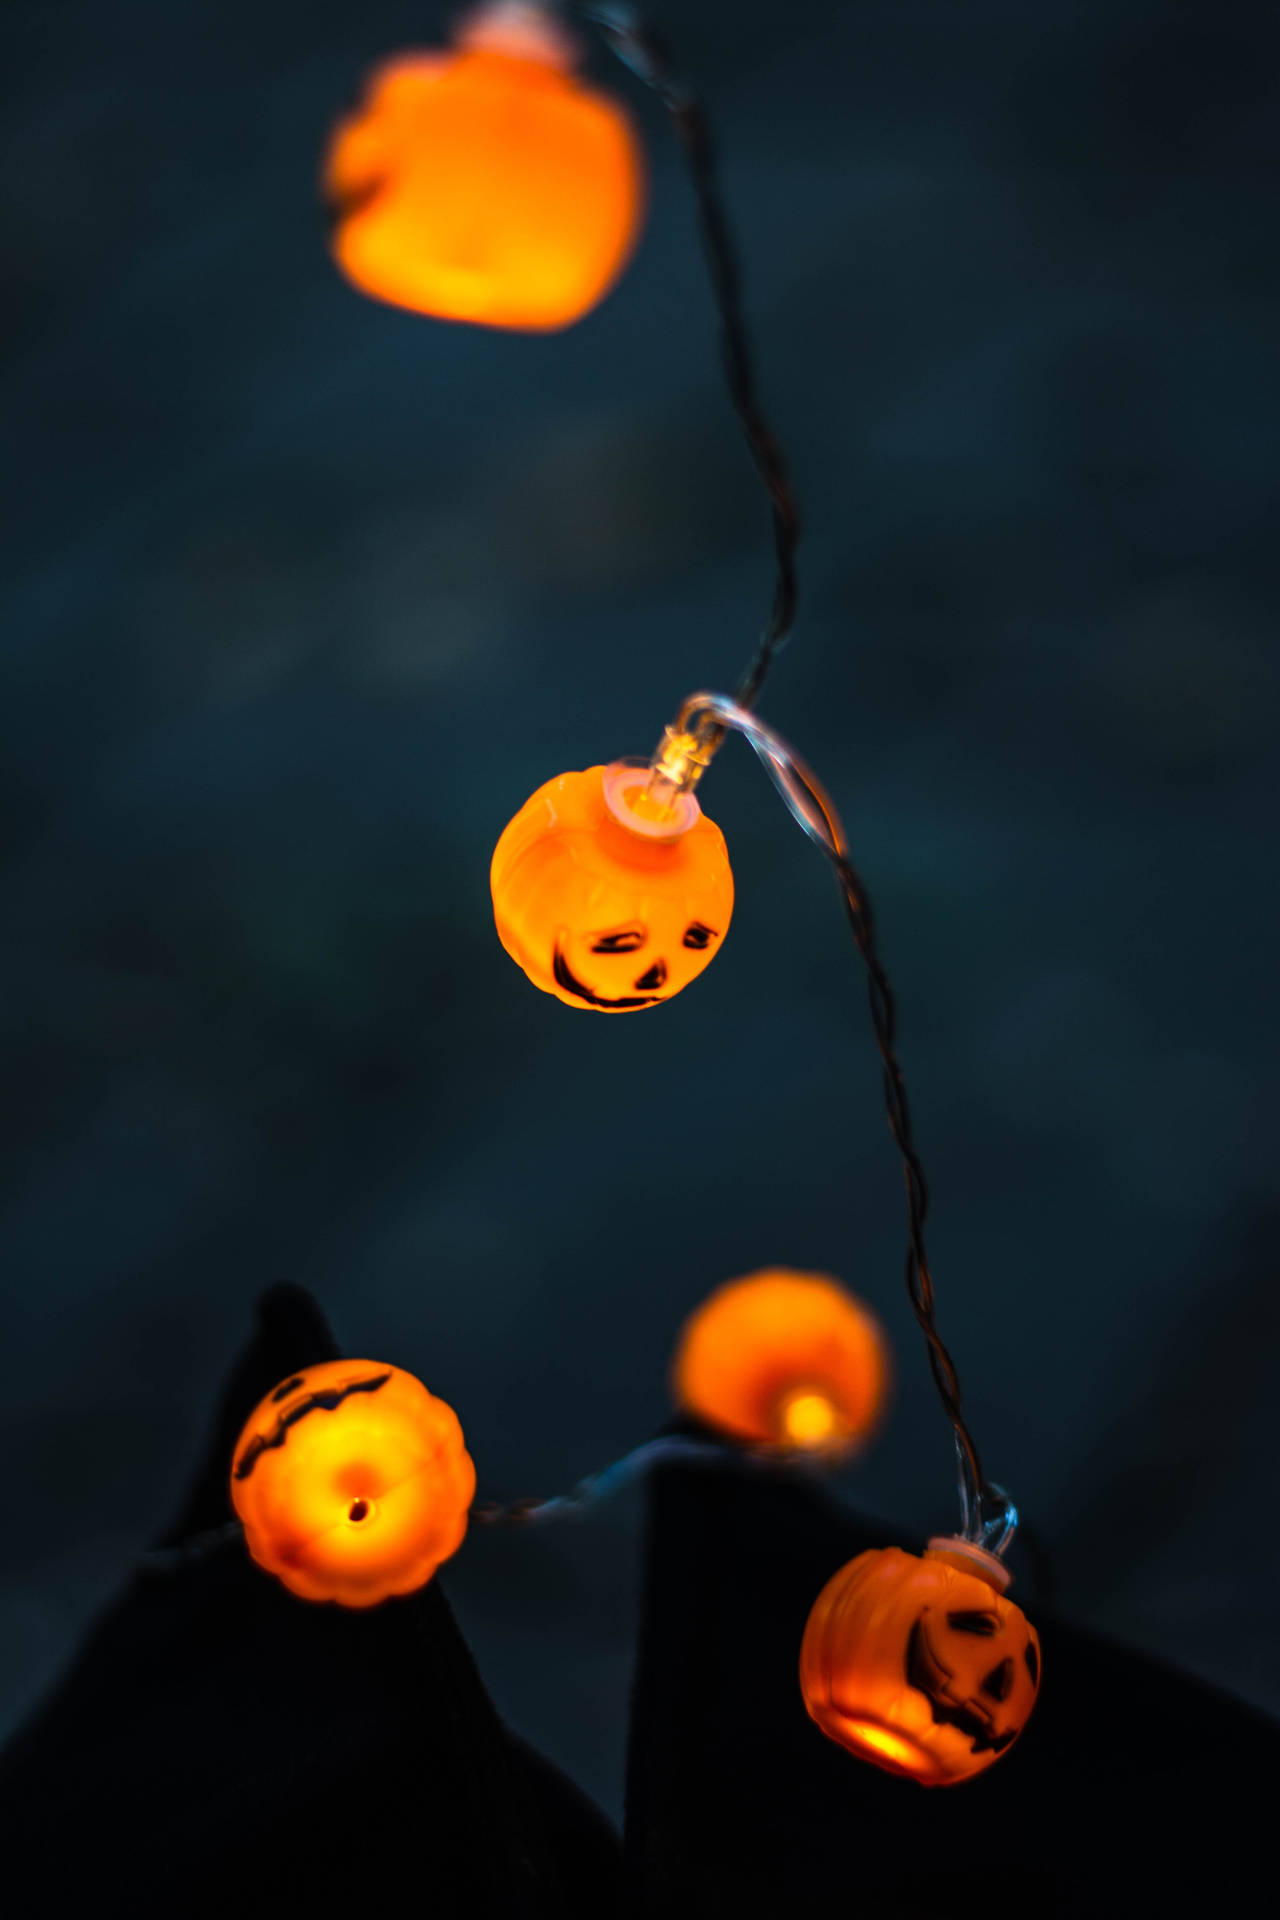 Trick-or-treat! Background